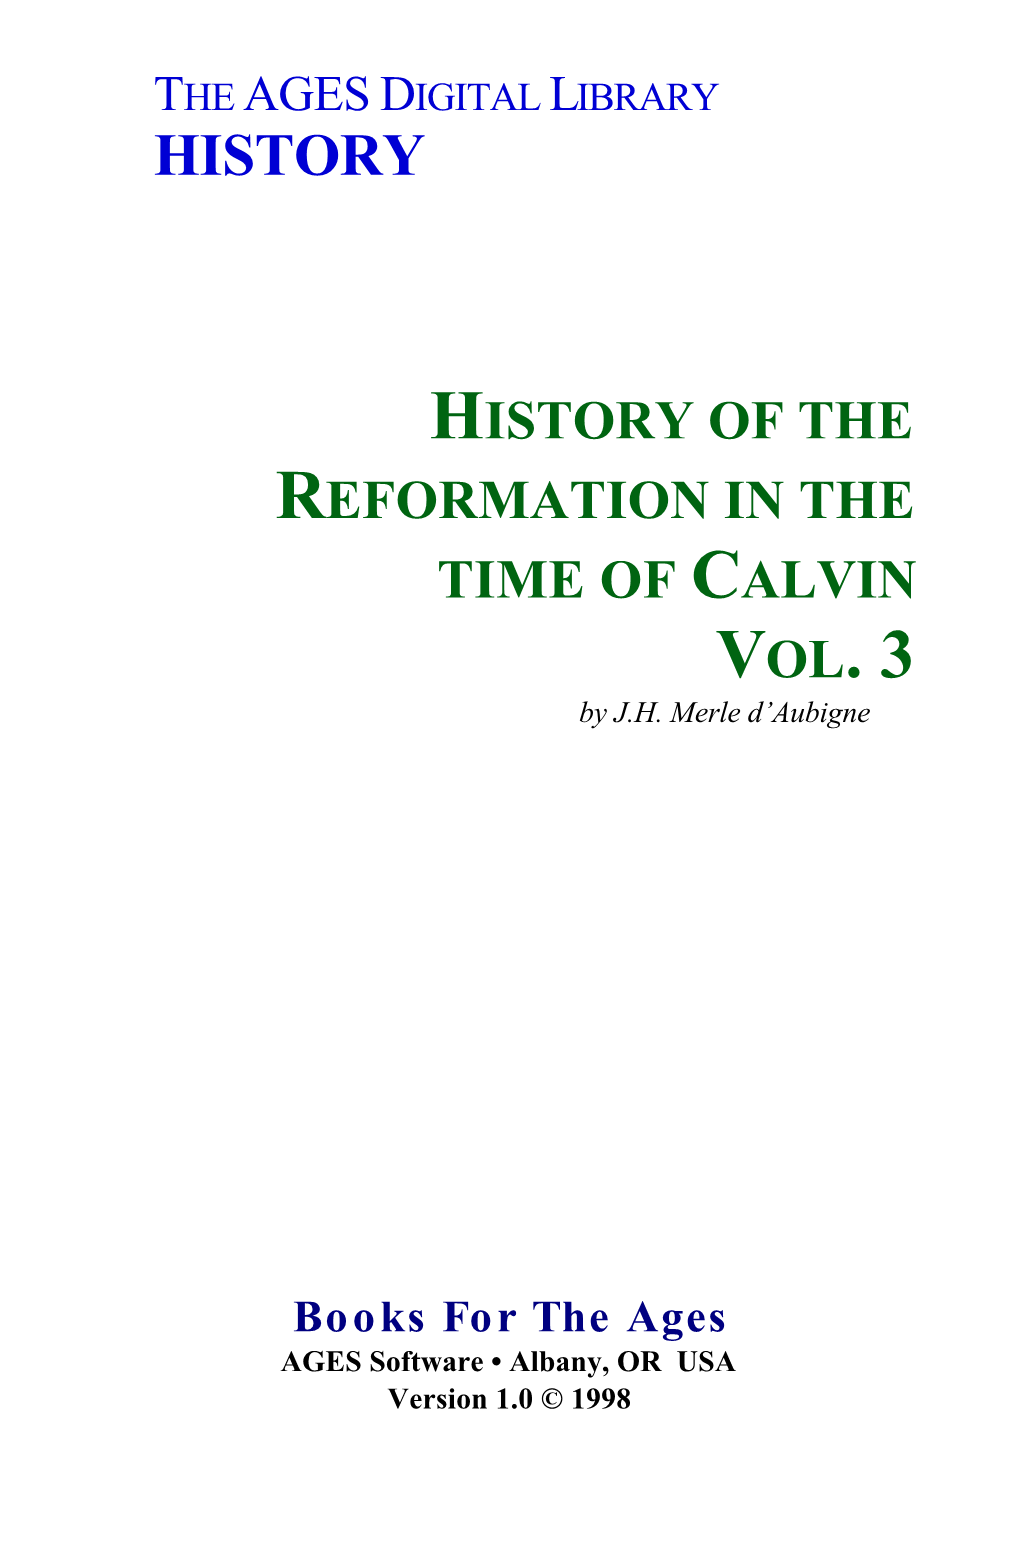 History of the Reformation in the Time of Calvin Vol.3